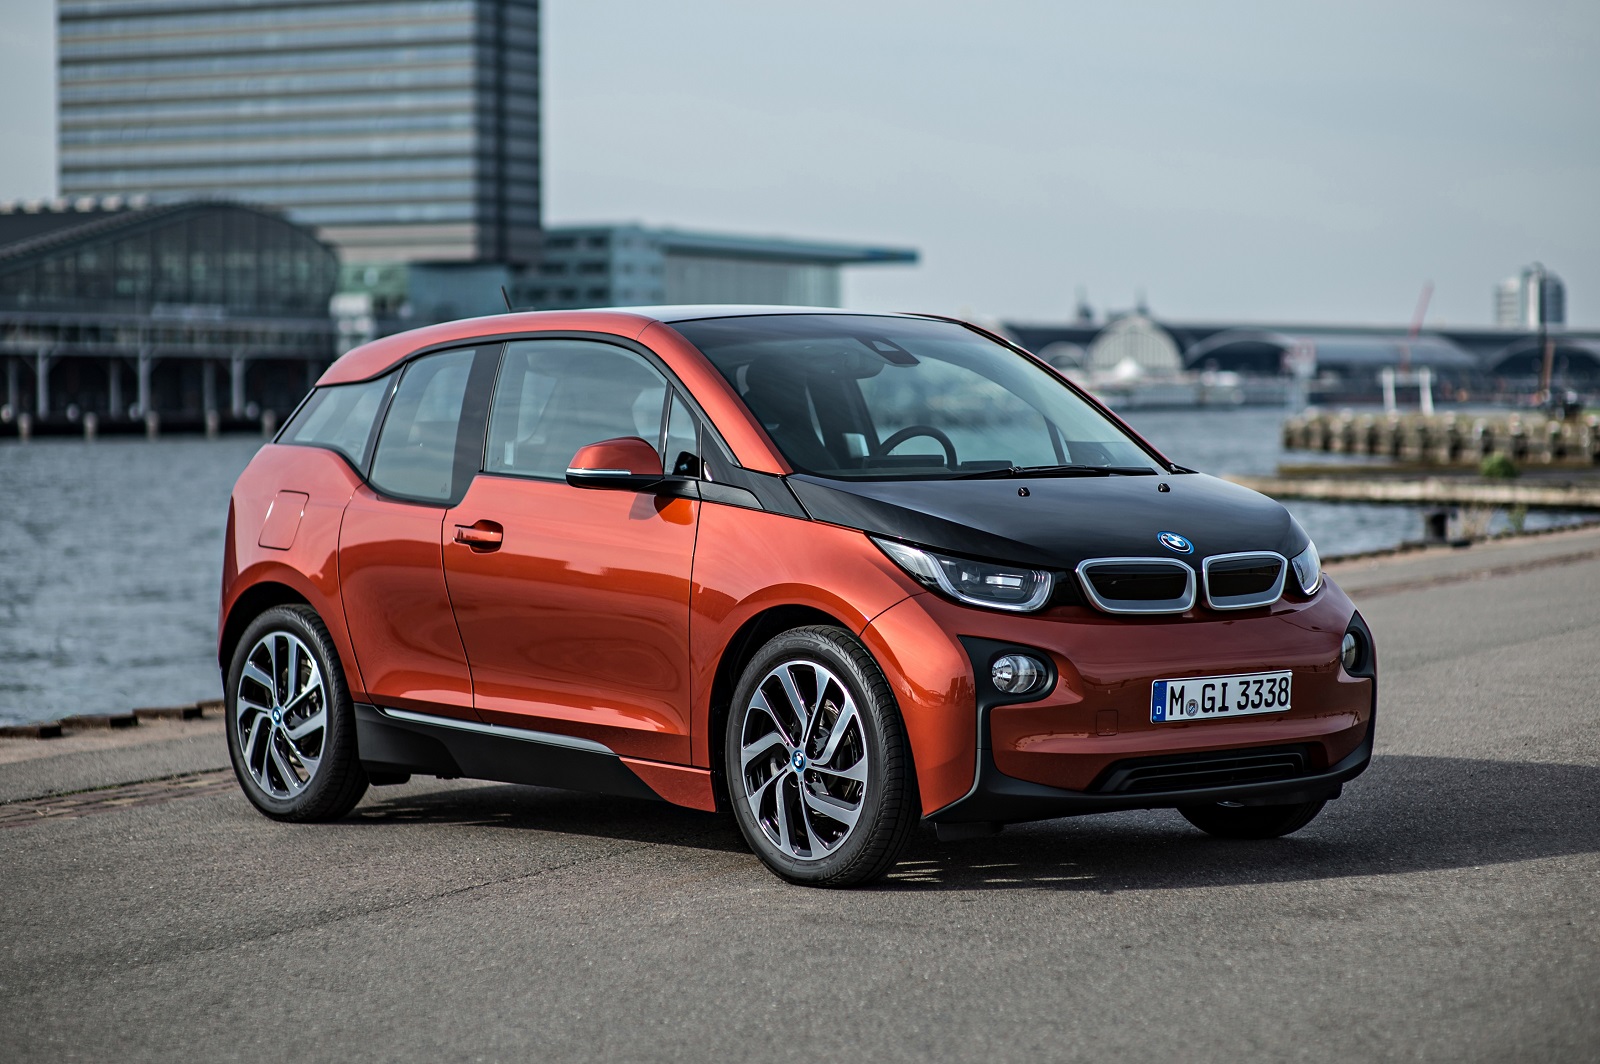 bmw-i3-electric-car-to-get-longer-range-next-year-ceo-says